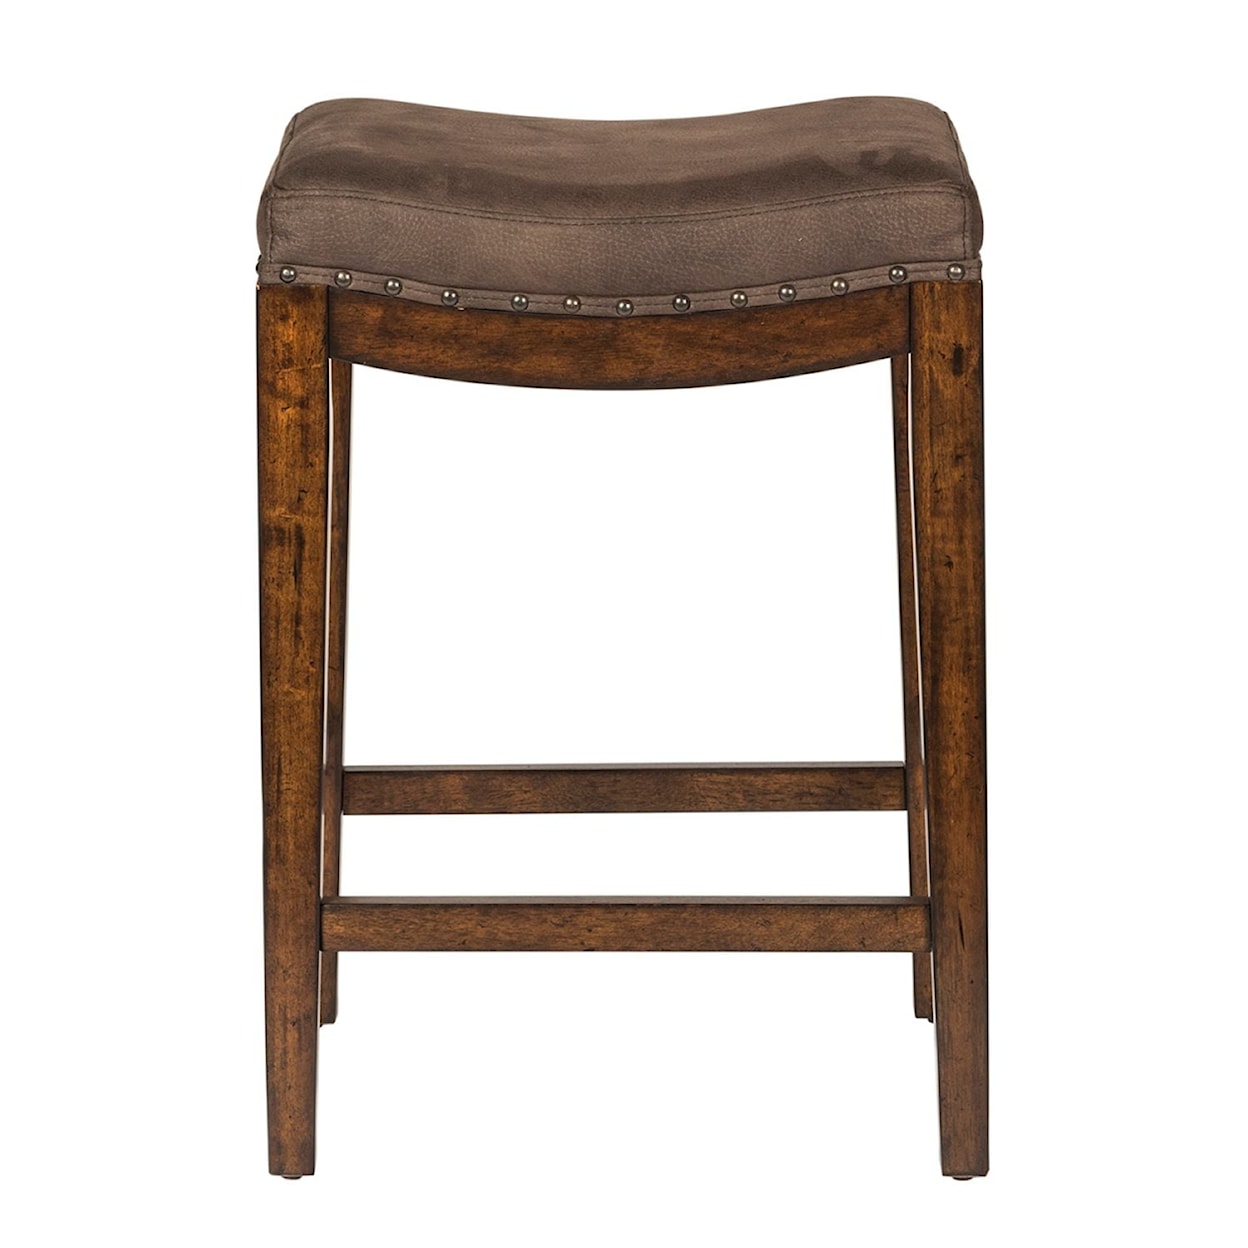 Liberty Furniture Aspen Skies Upholstered Console Stool